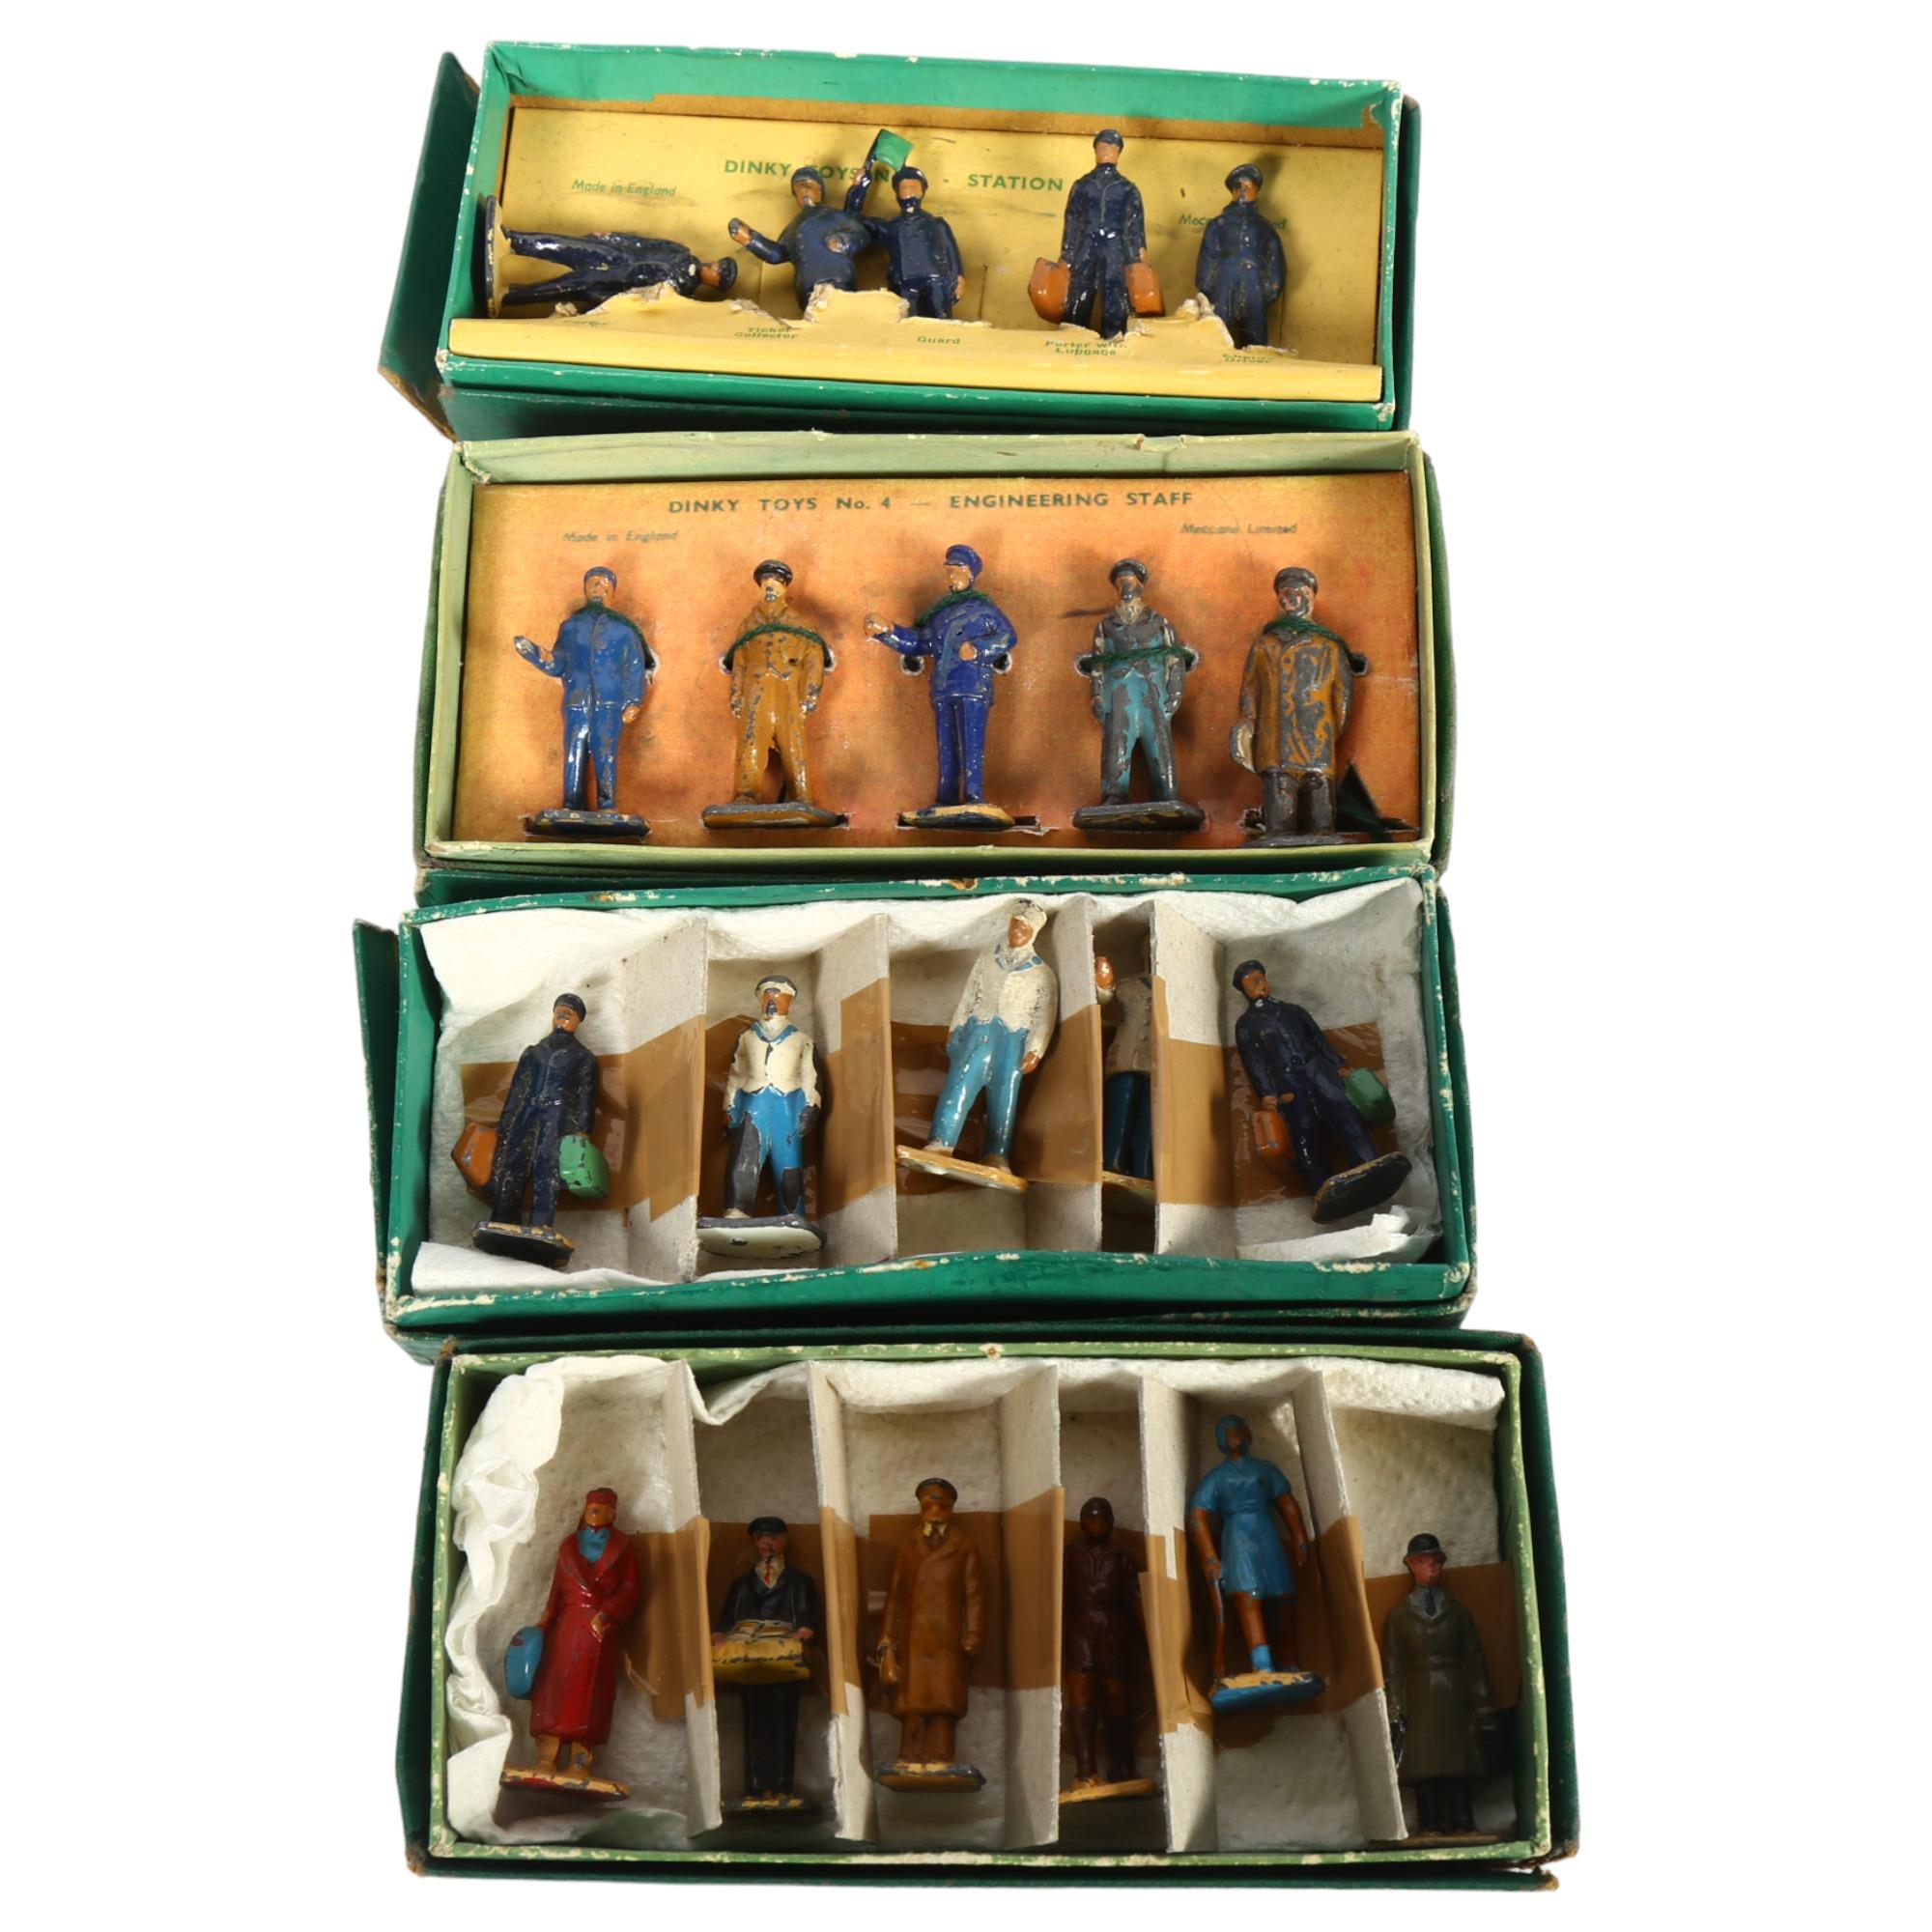 DINKY TOYS - a group of boxed O gauge miniature figures for model railways, by Meccano Ltd,